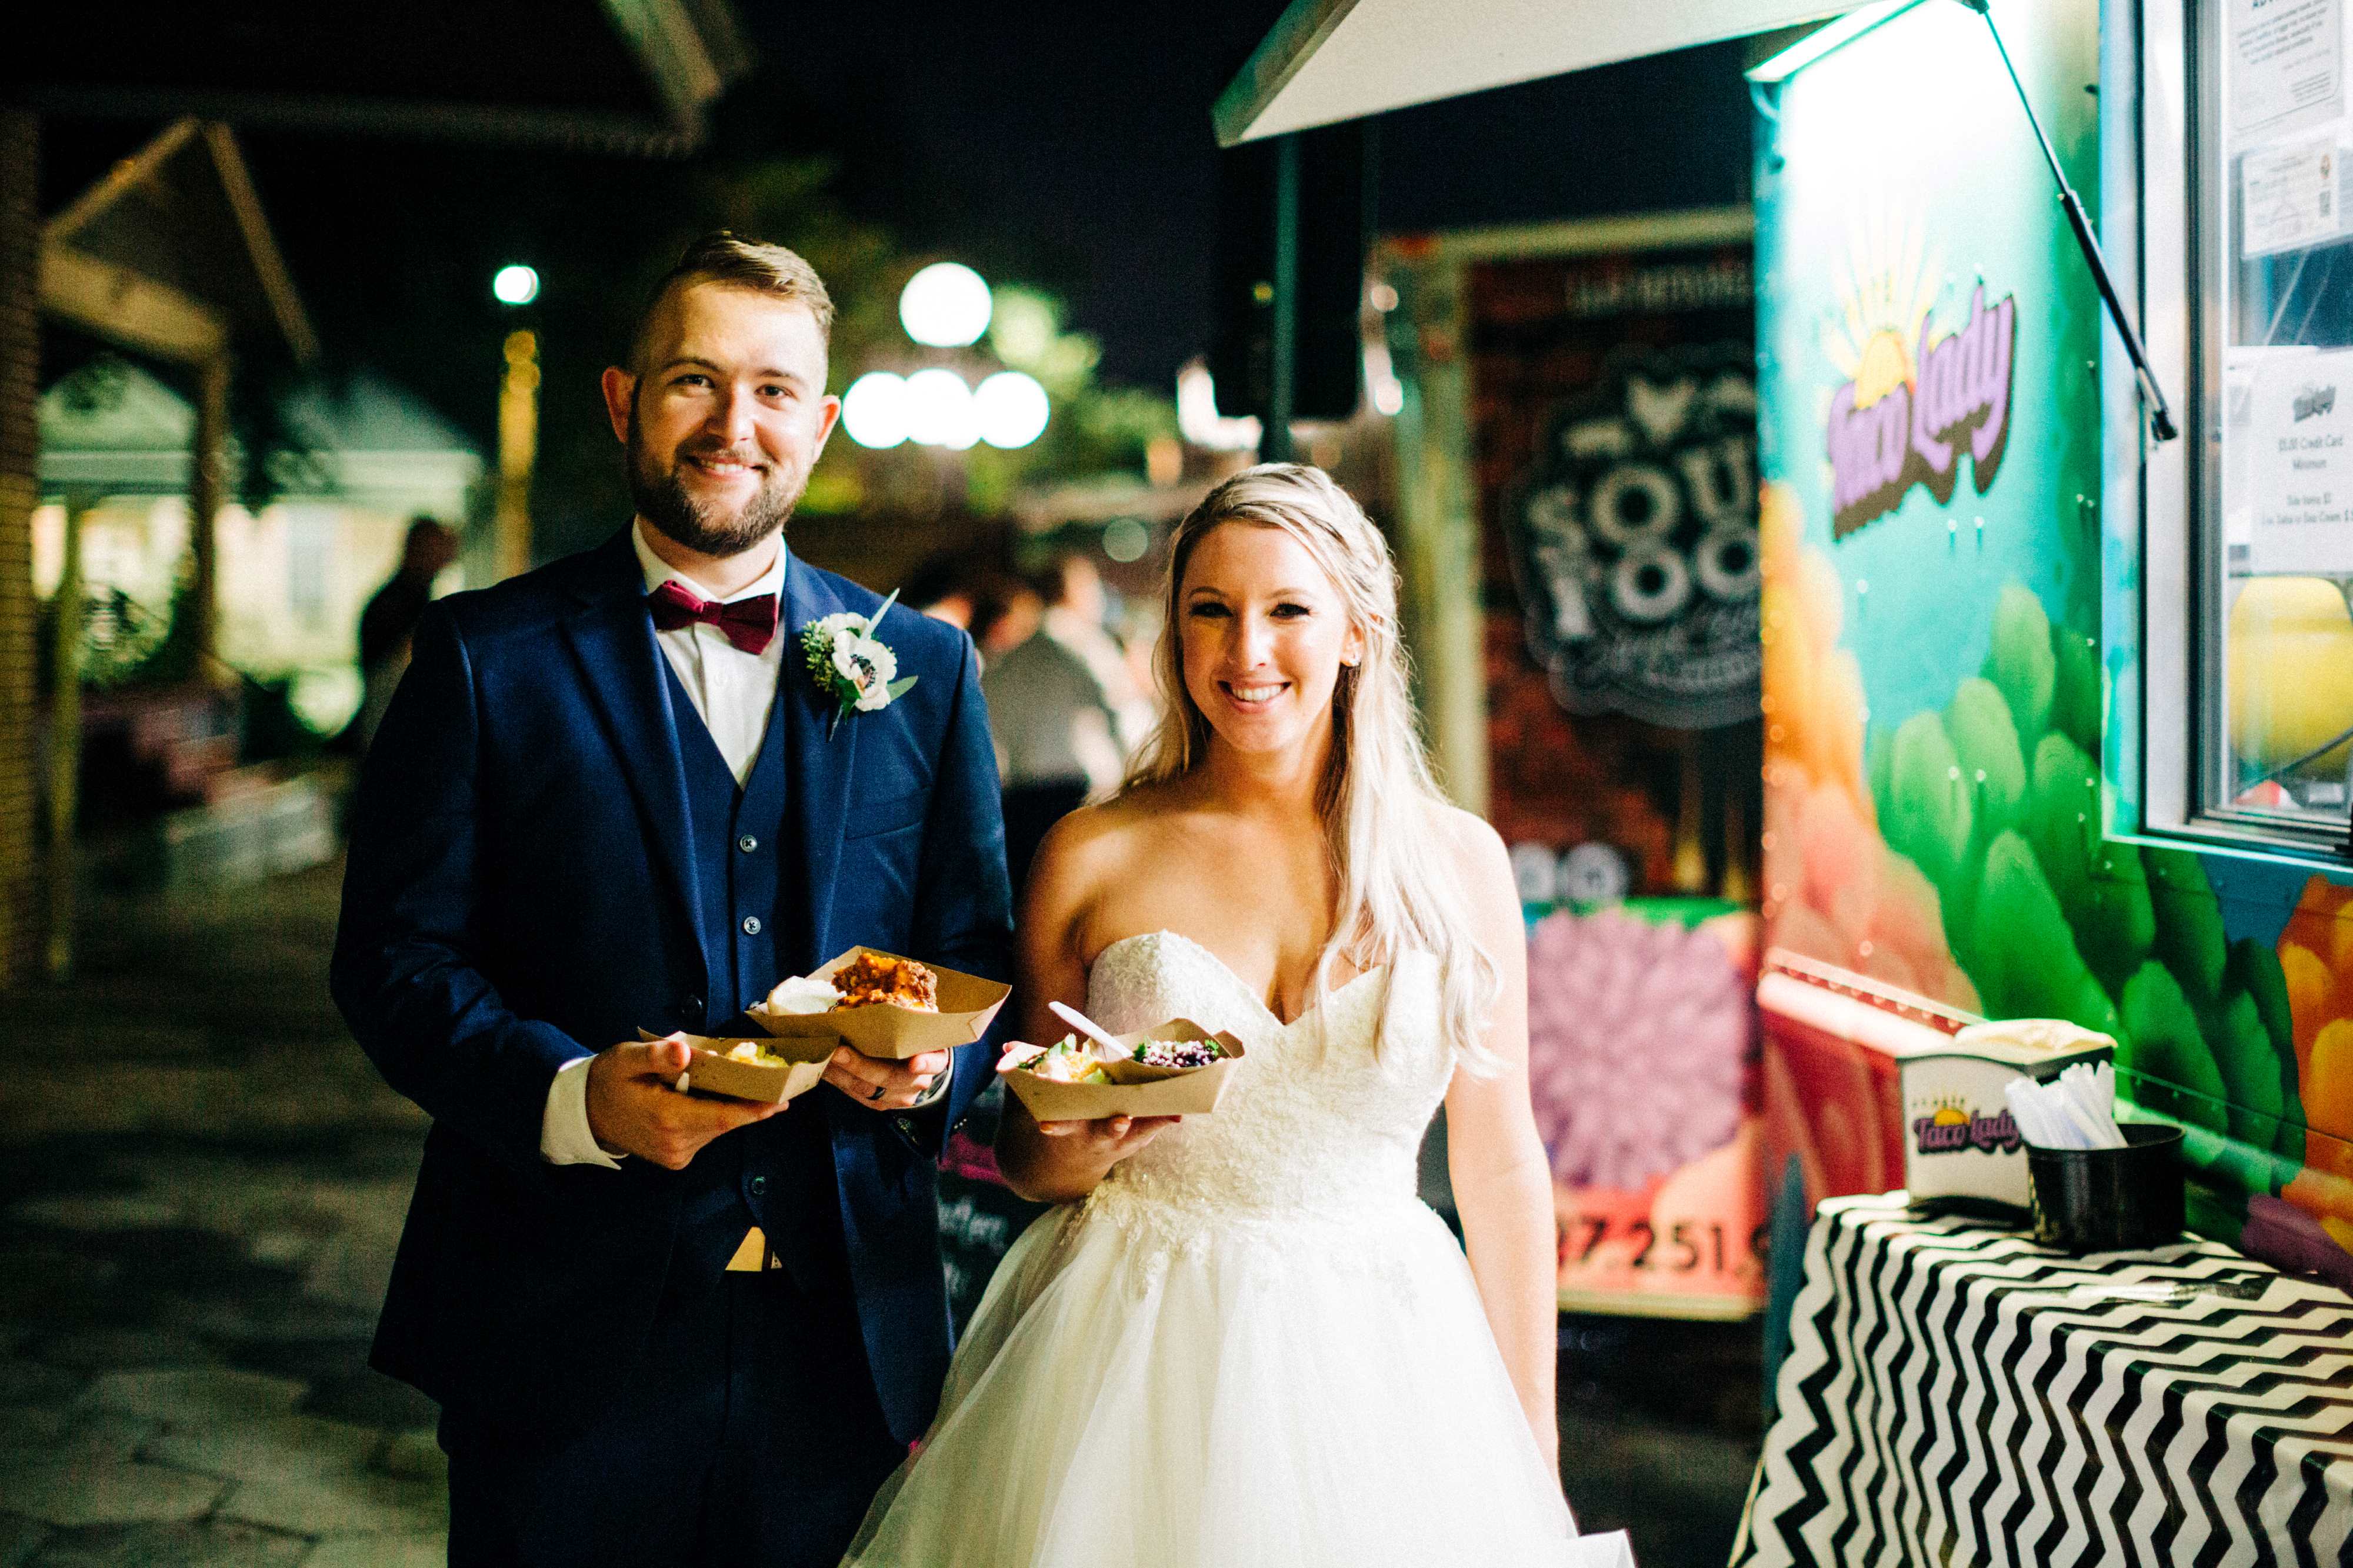 Bride and Groom with Food from Food Trucks